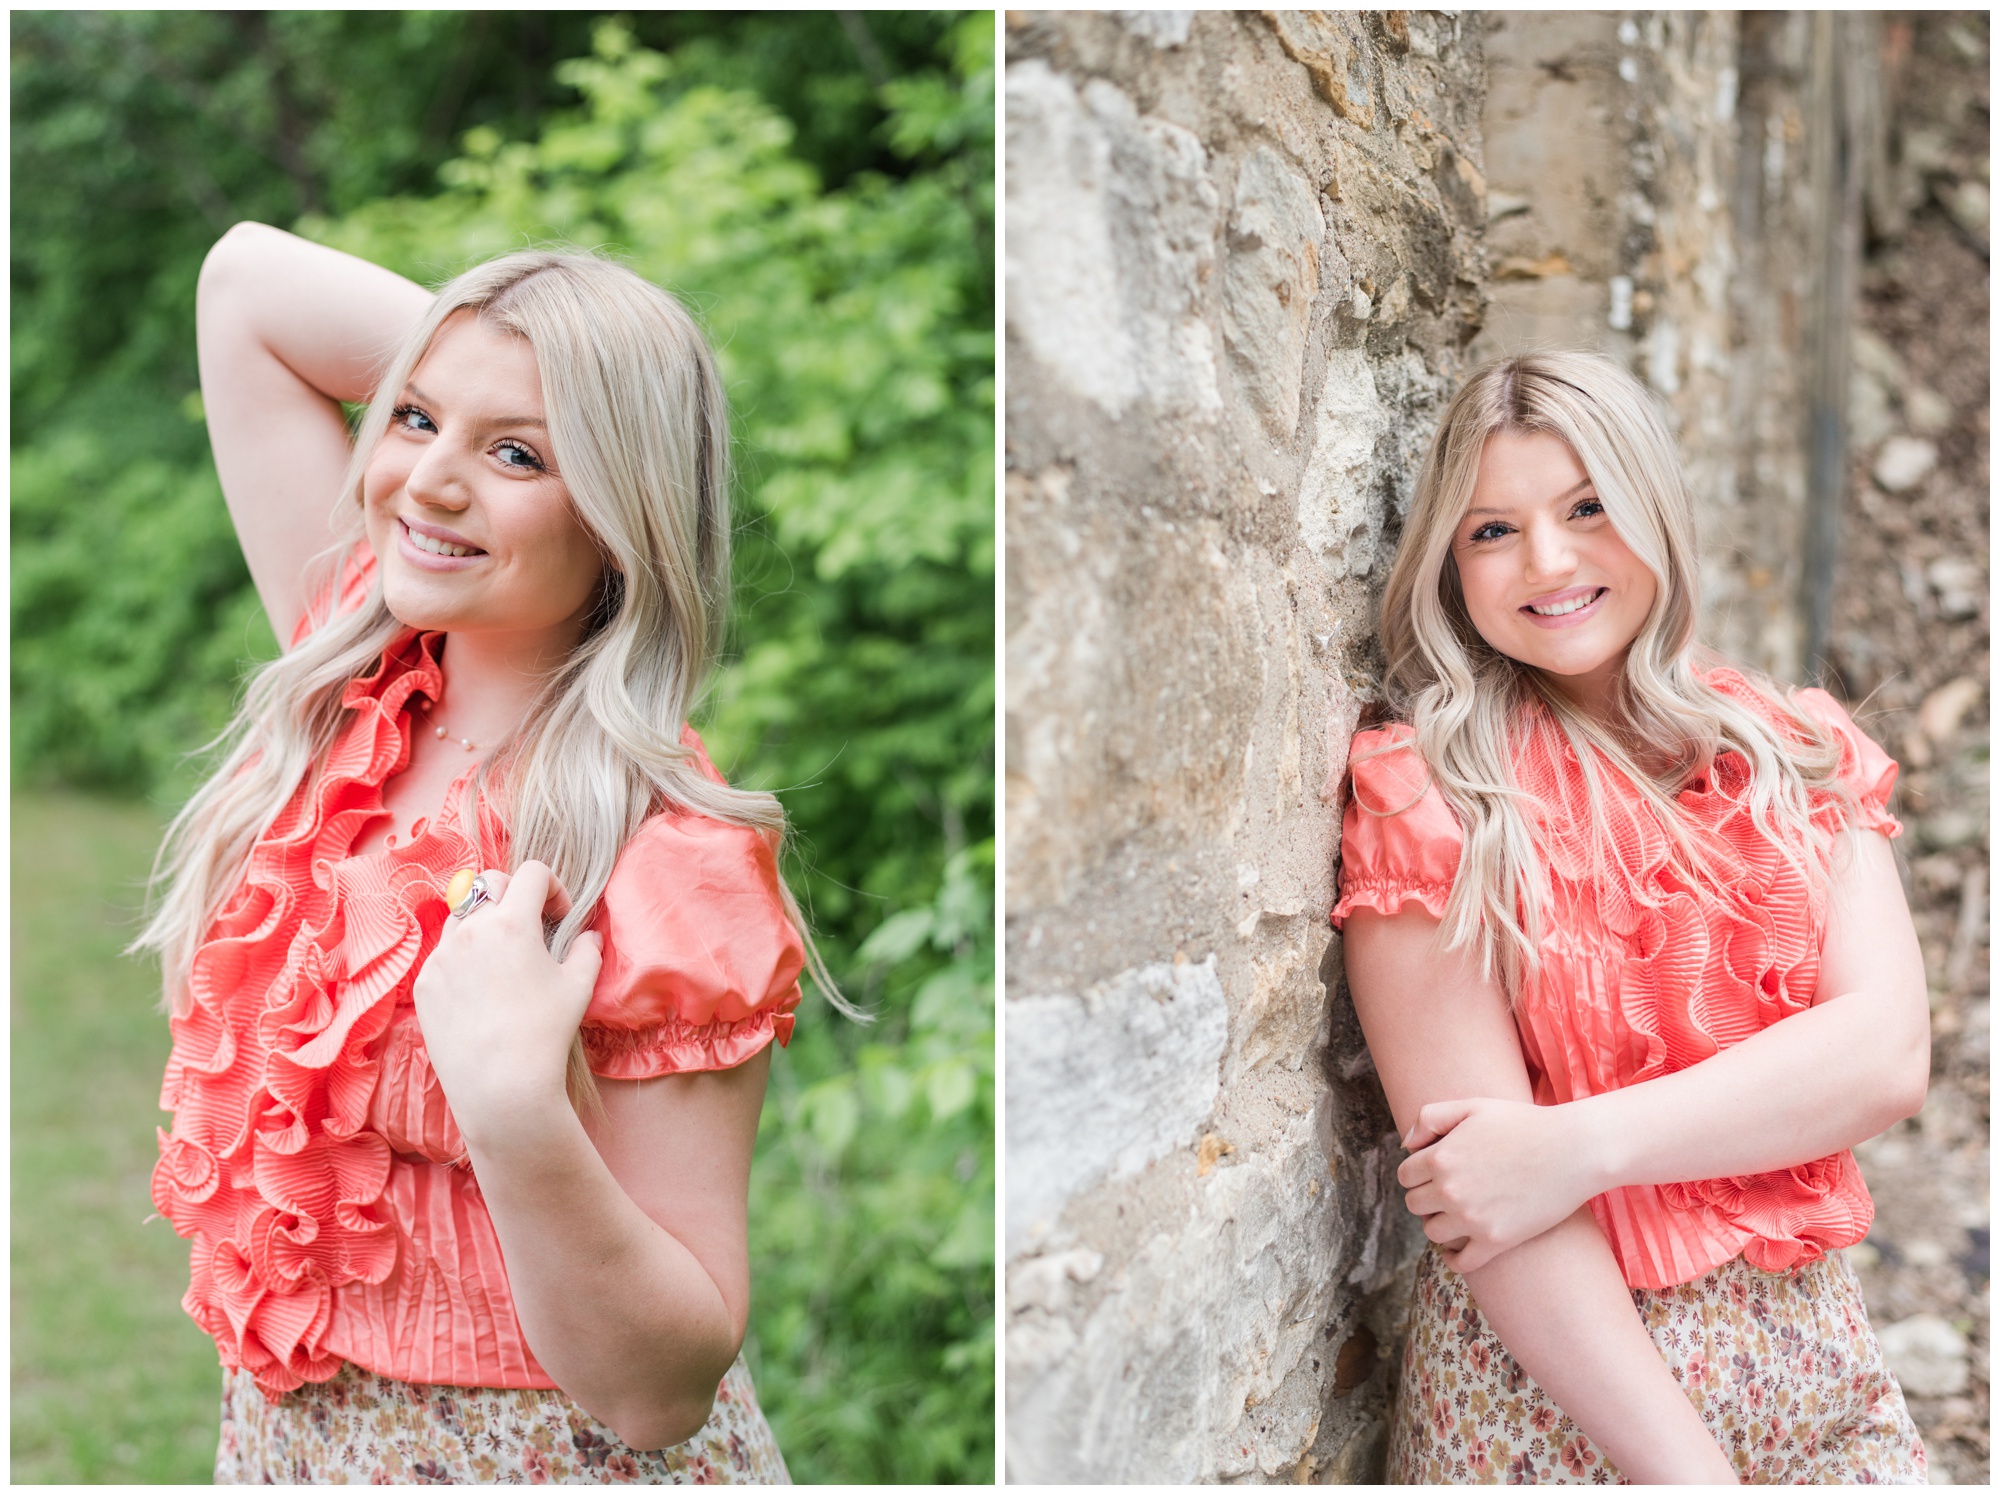 Downtown Fort Worth Senior Session | Fort Worth Senior Session | Fort Worth Senior Photographer | Lauren Grimes Photography